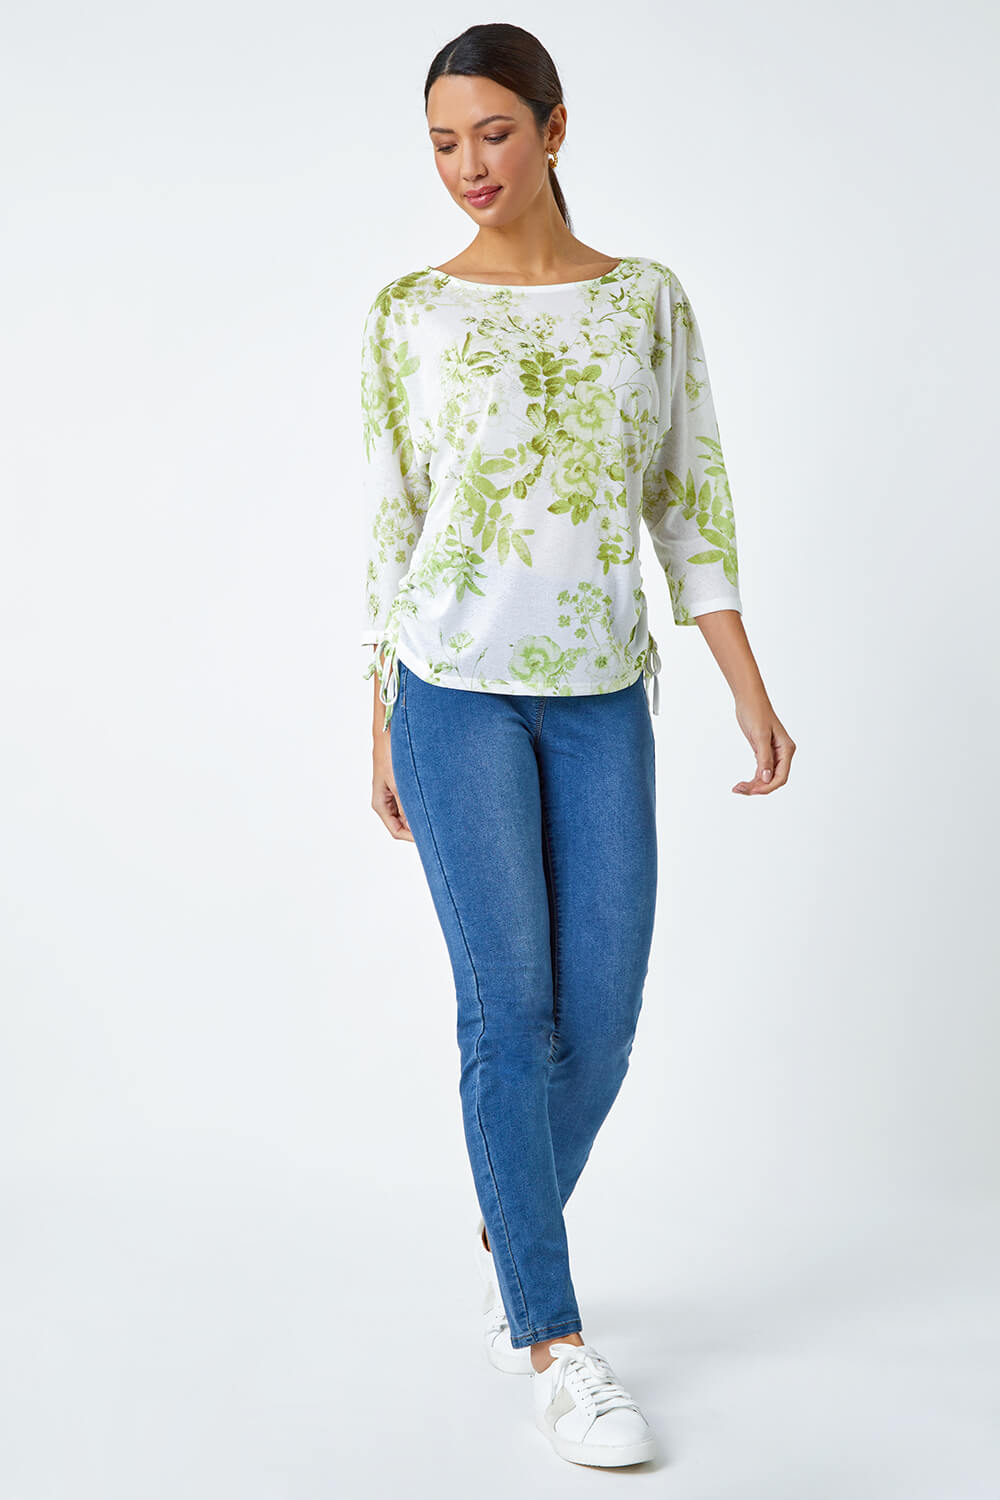 Lime Floral Print Ruched Tie Detail Top, Image 2 of 5